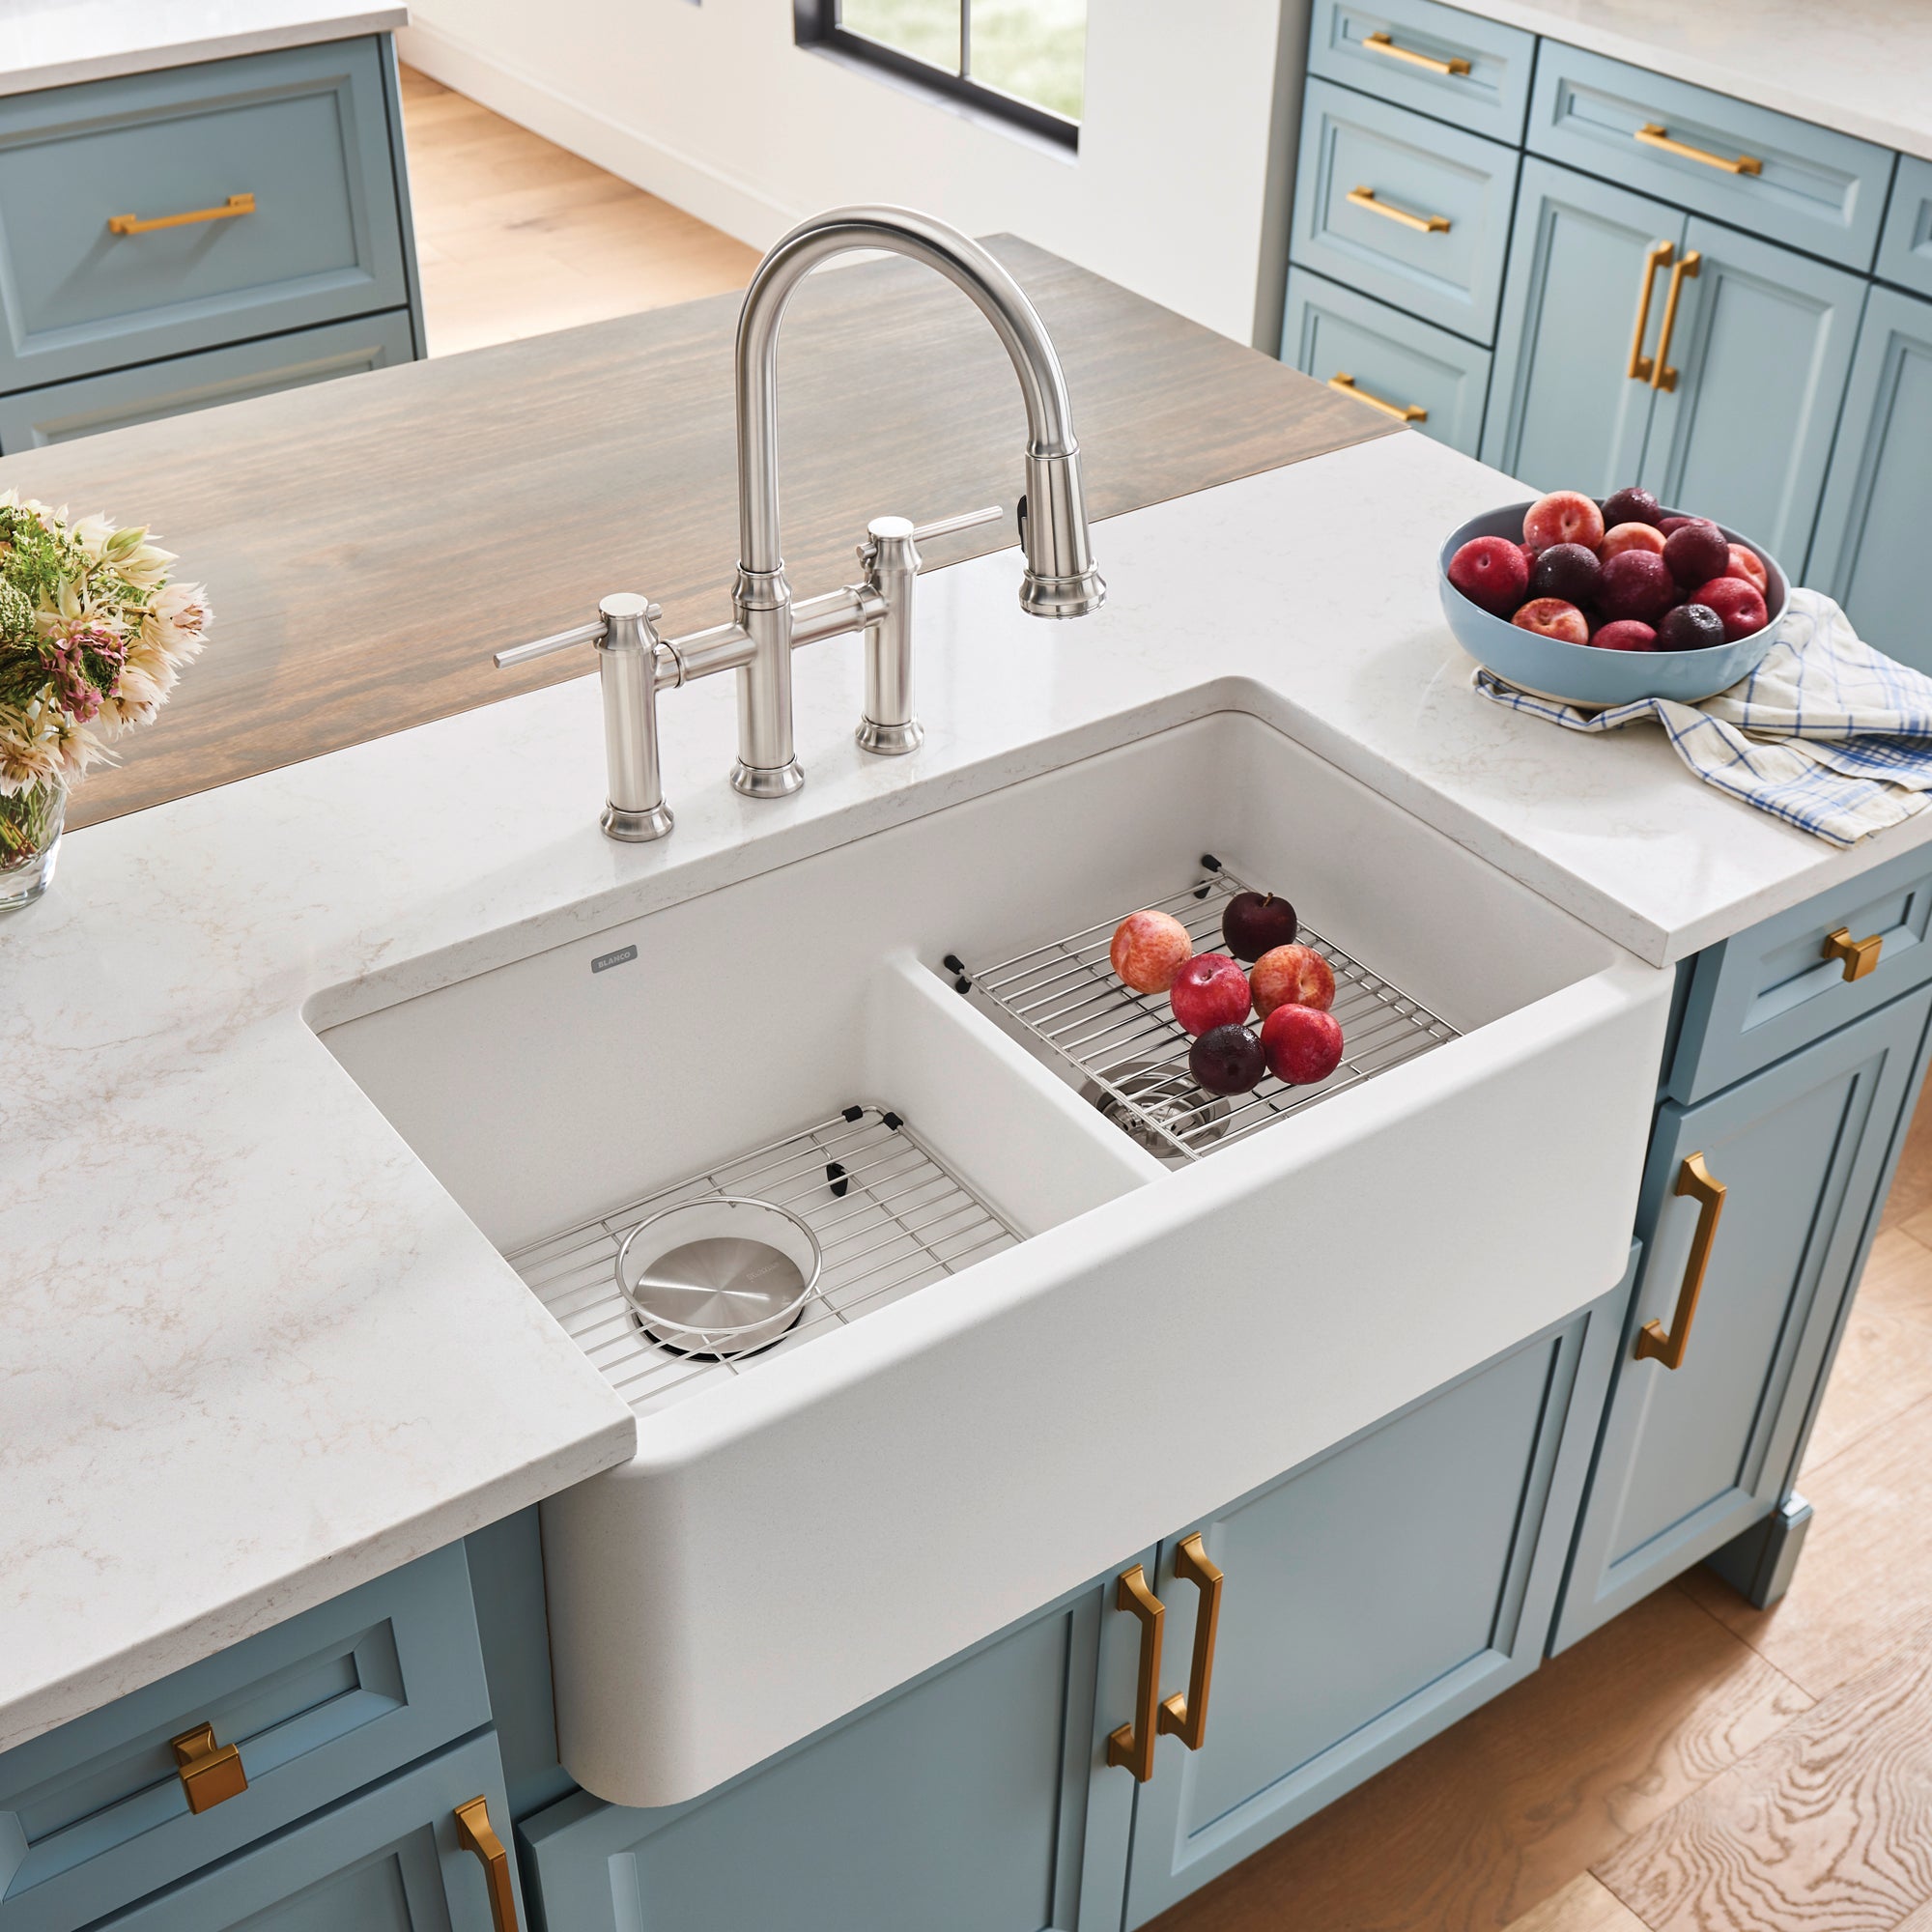 How to Unclog a Sink: 5 Natural (& Easy) Ways - Kitchen Cabinet Kings